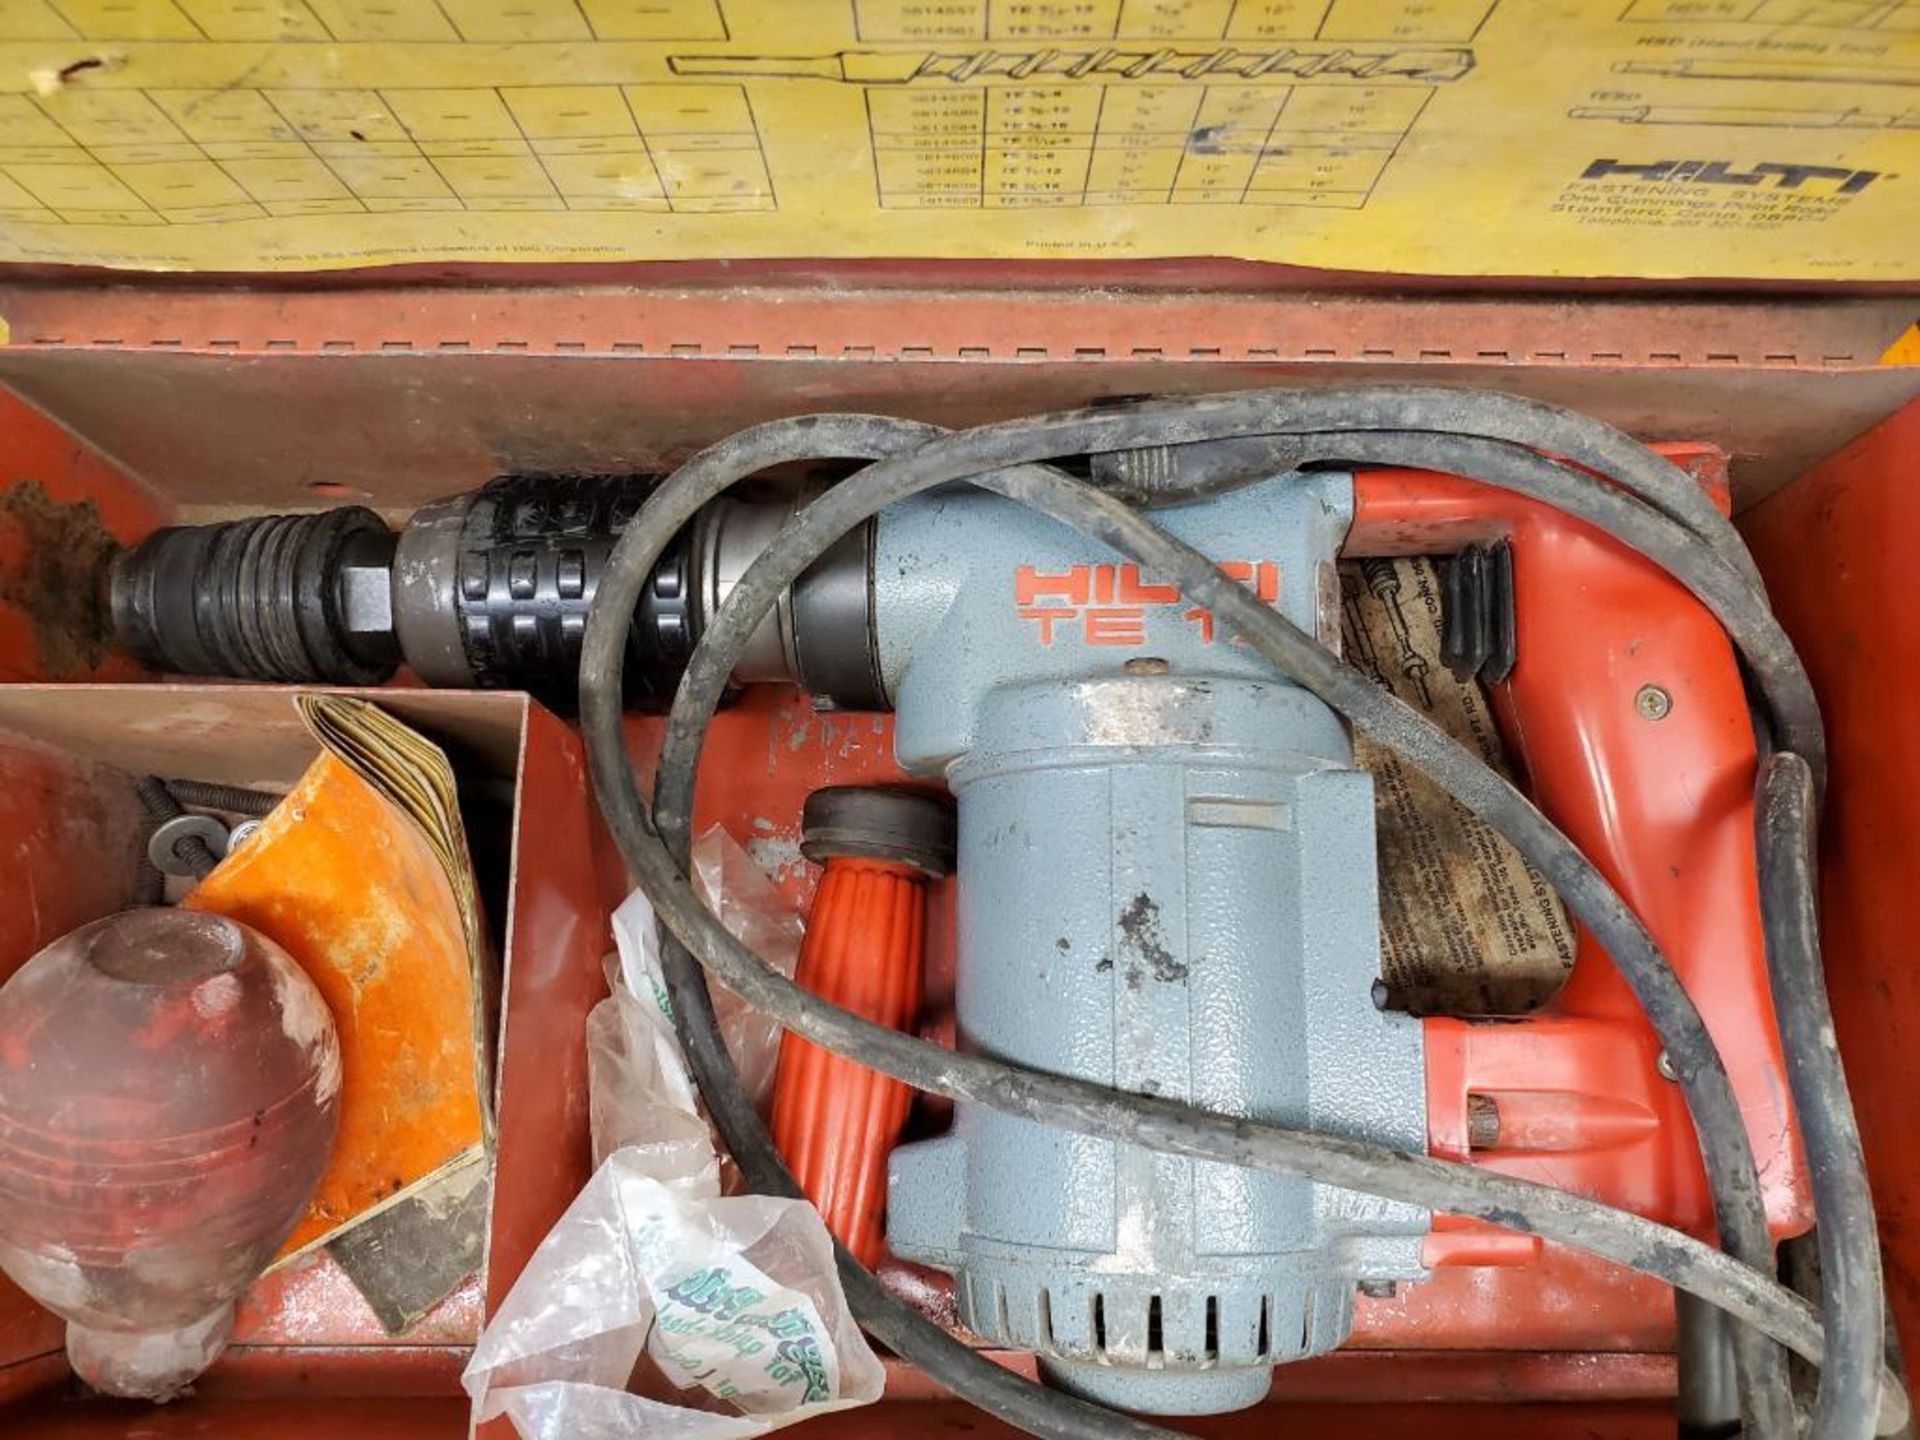 HILTI TE-17 ELECTRIC HAMMER DRILL IN METAL CASE - Image 3 of 5